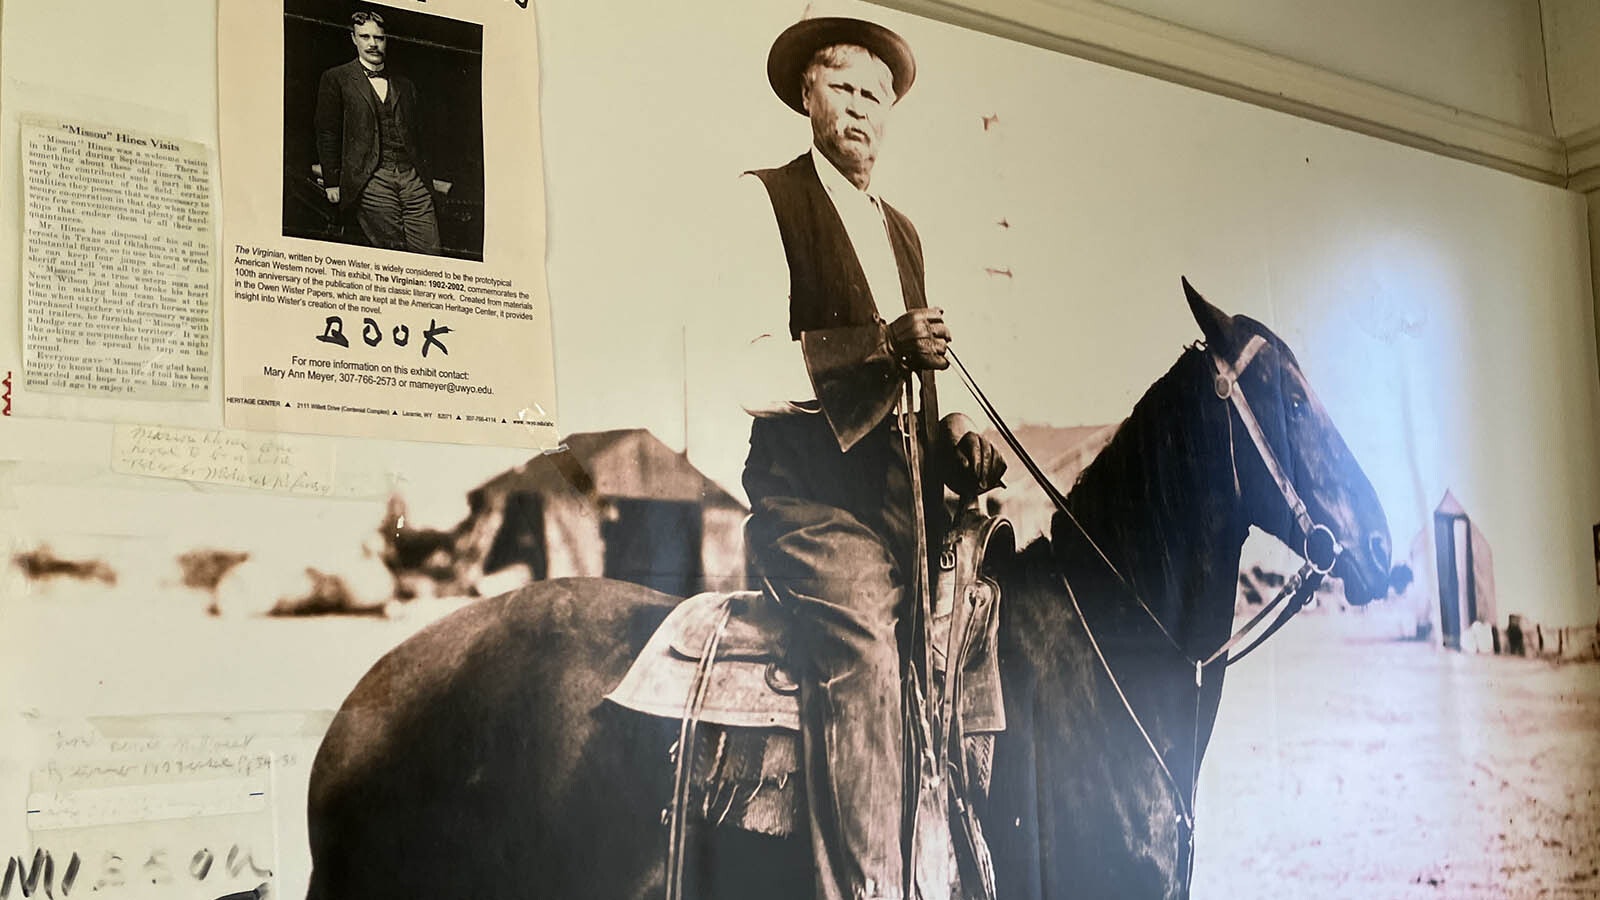 A blow up photo of William “Missou” Hines dominates one the rooms at the Salt Creek Museum in Midwest, Wyoming. He worked for the Midwest Oil Co. as “head teamster” and allegedly as an oil claim enforcer.